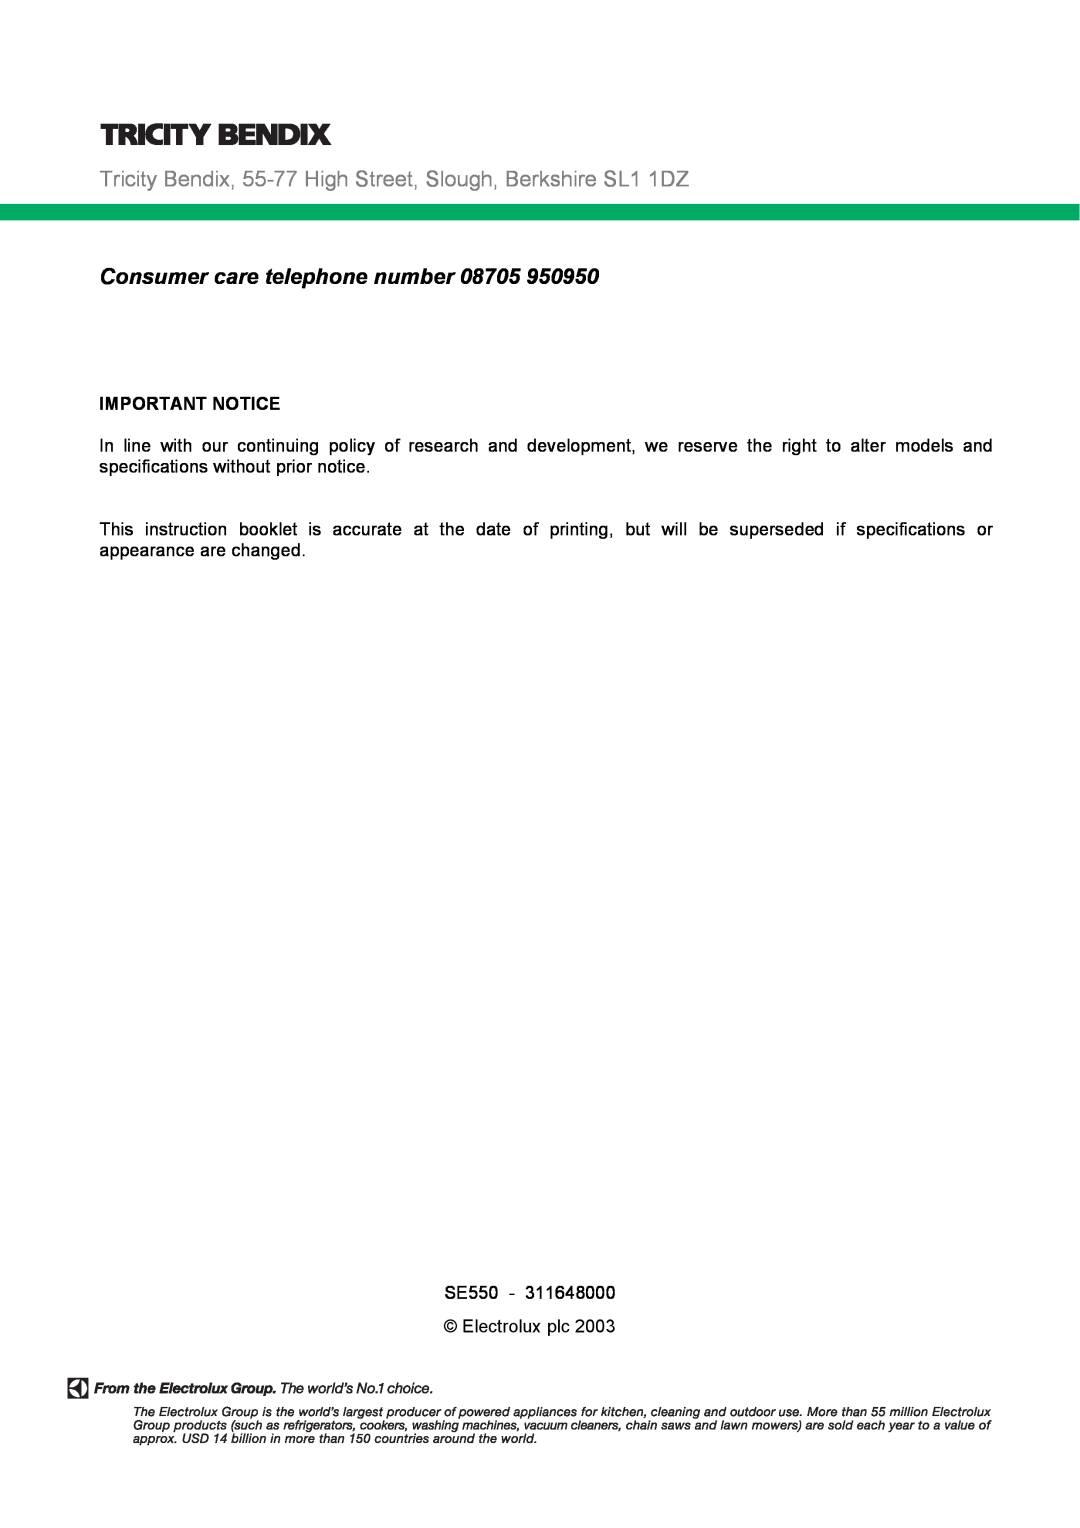 Tricity Bendix SE550 installation instructions Consumer care telephone number, Important Notice 